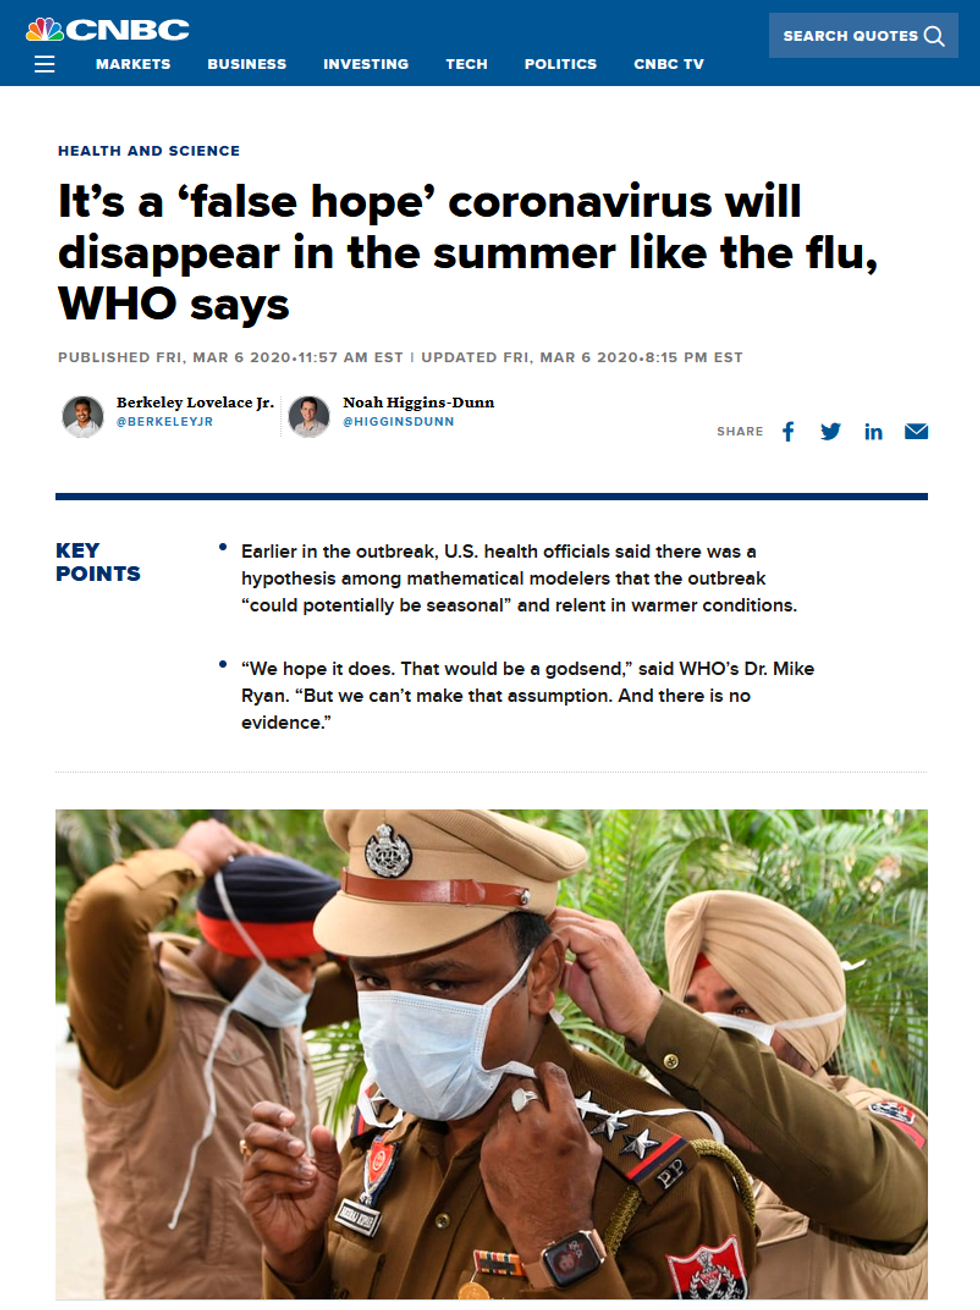 CNBC: It's a 'false hope' coronavirus will disappear in the summer like the flu, WHO says